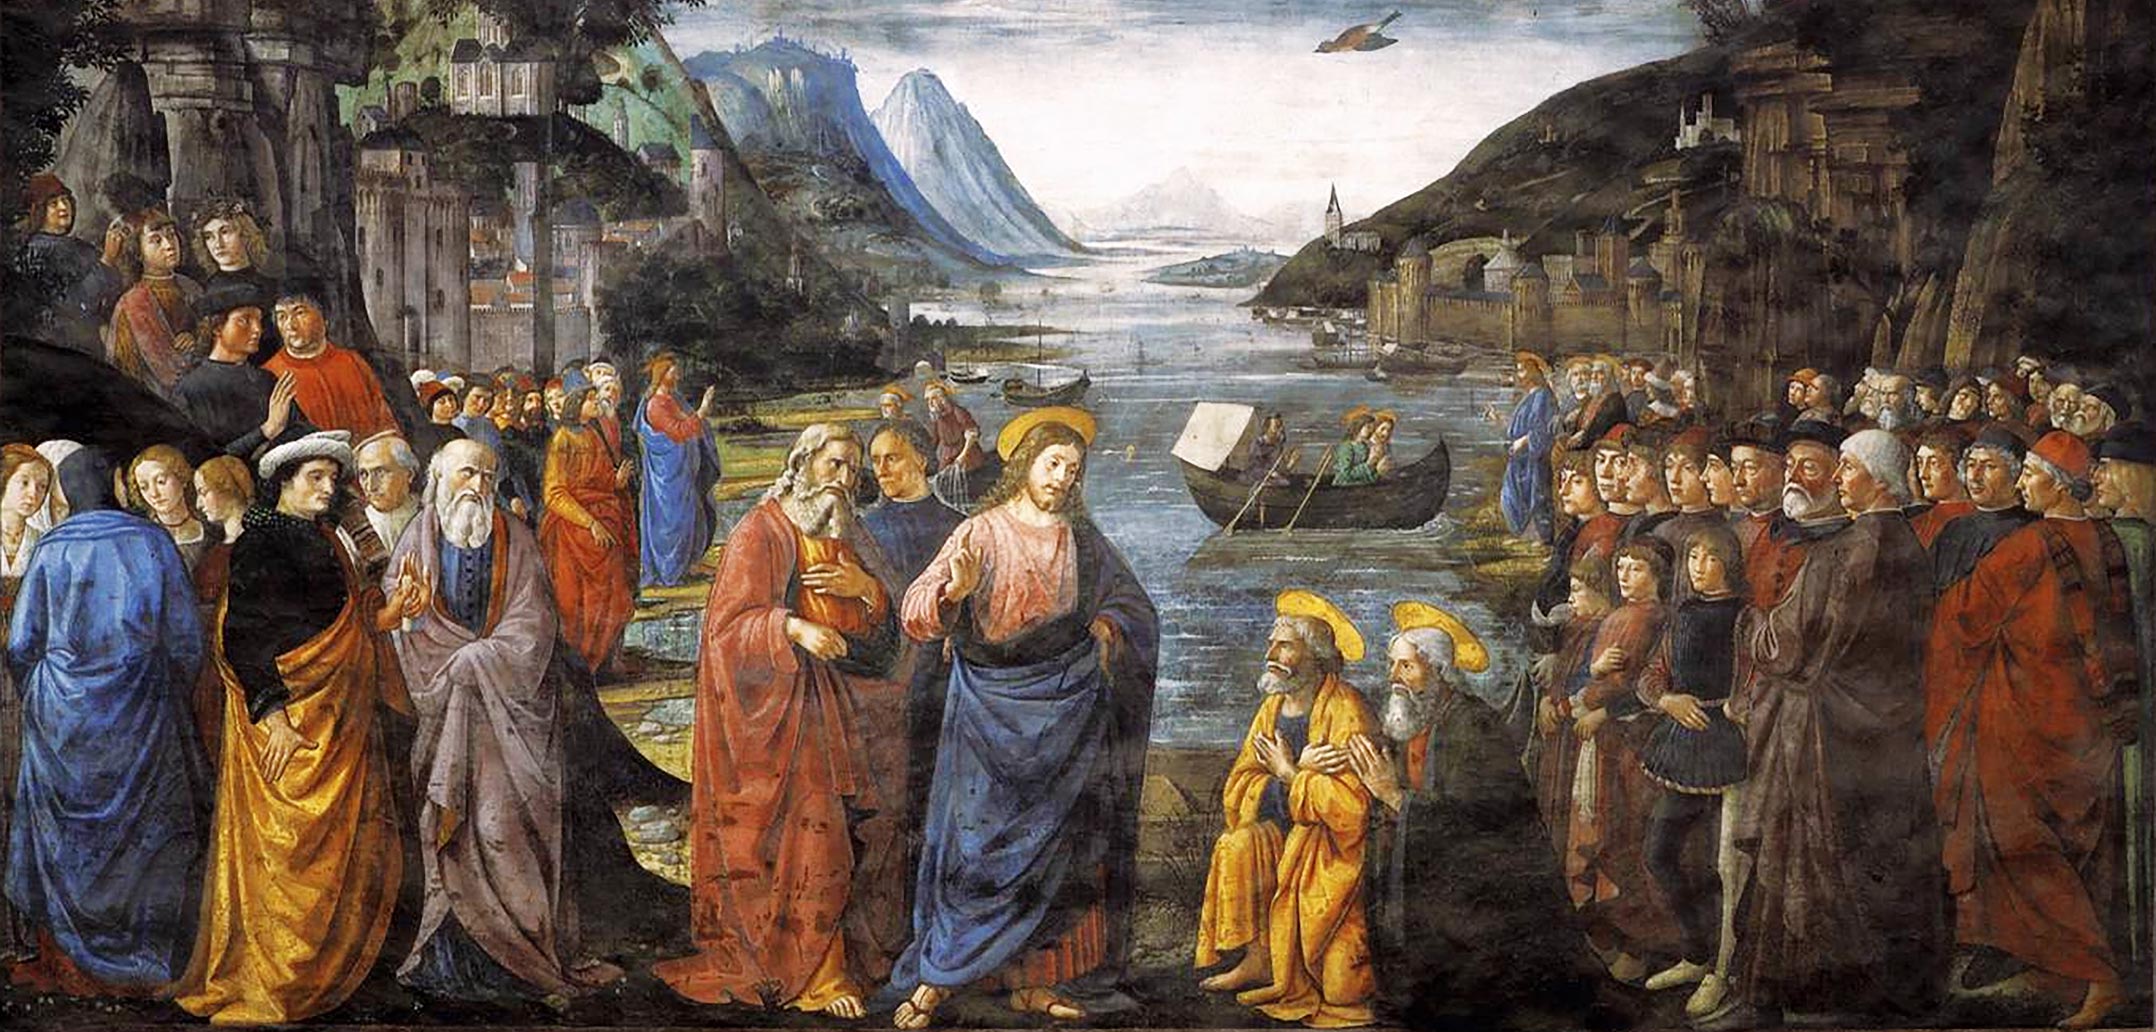 Vocation of the Apostles by Domenico Ghirlandaio and workshop